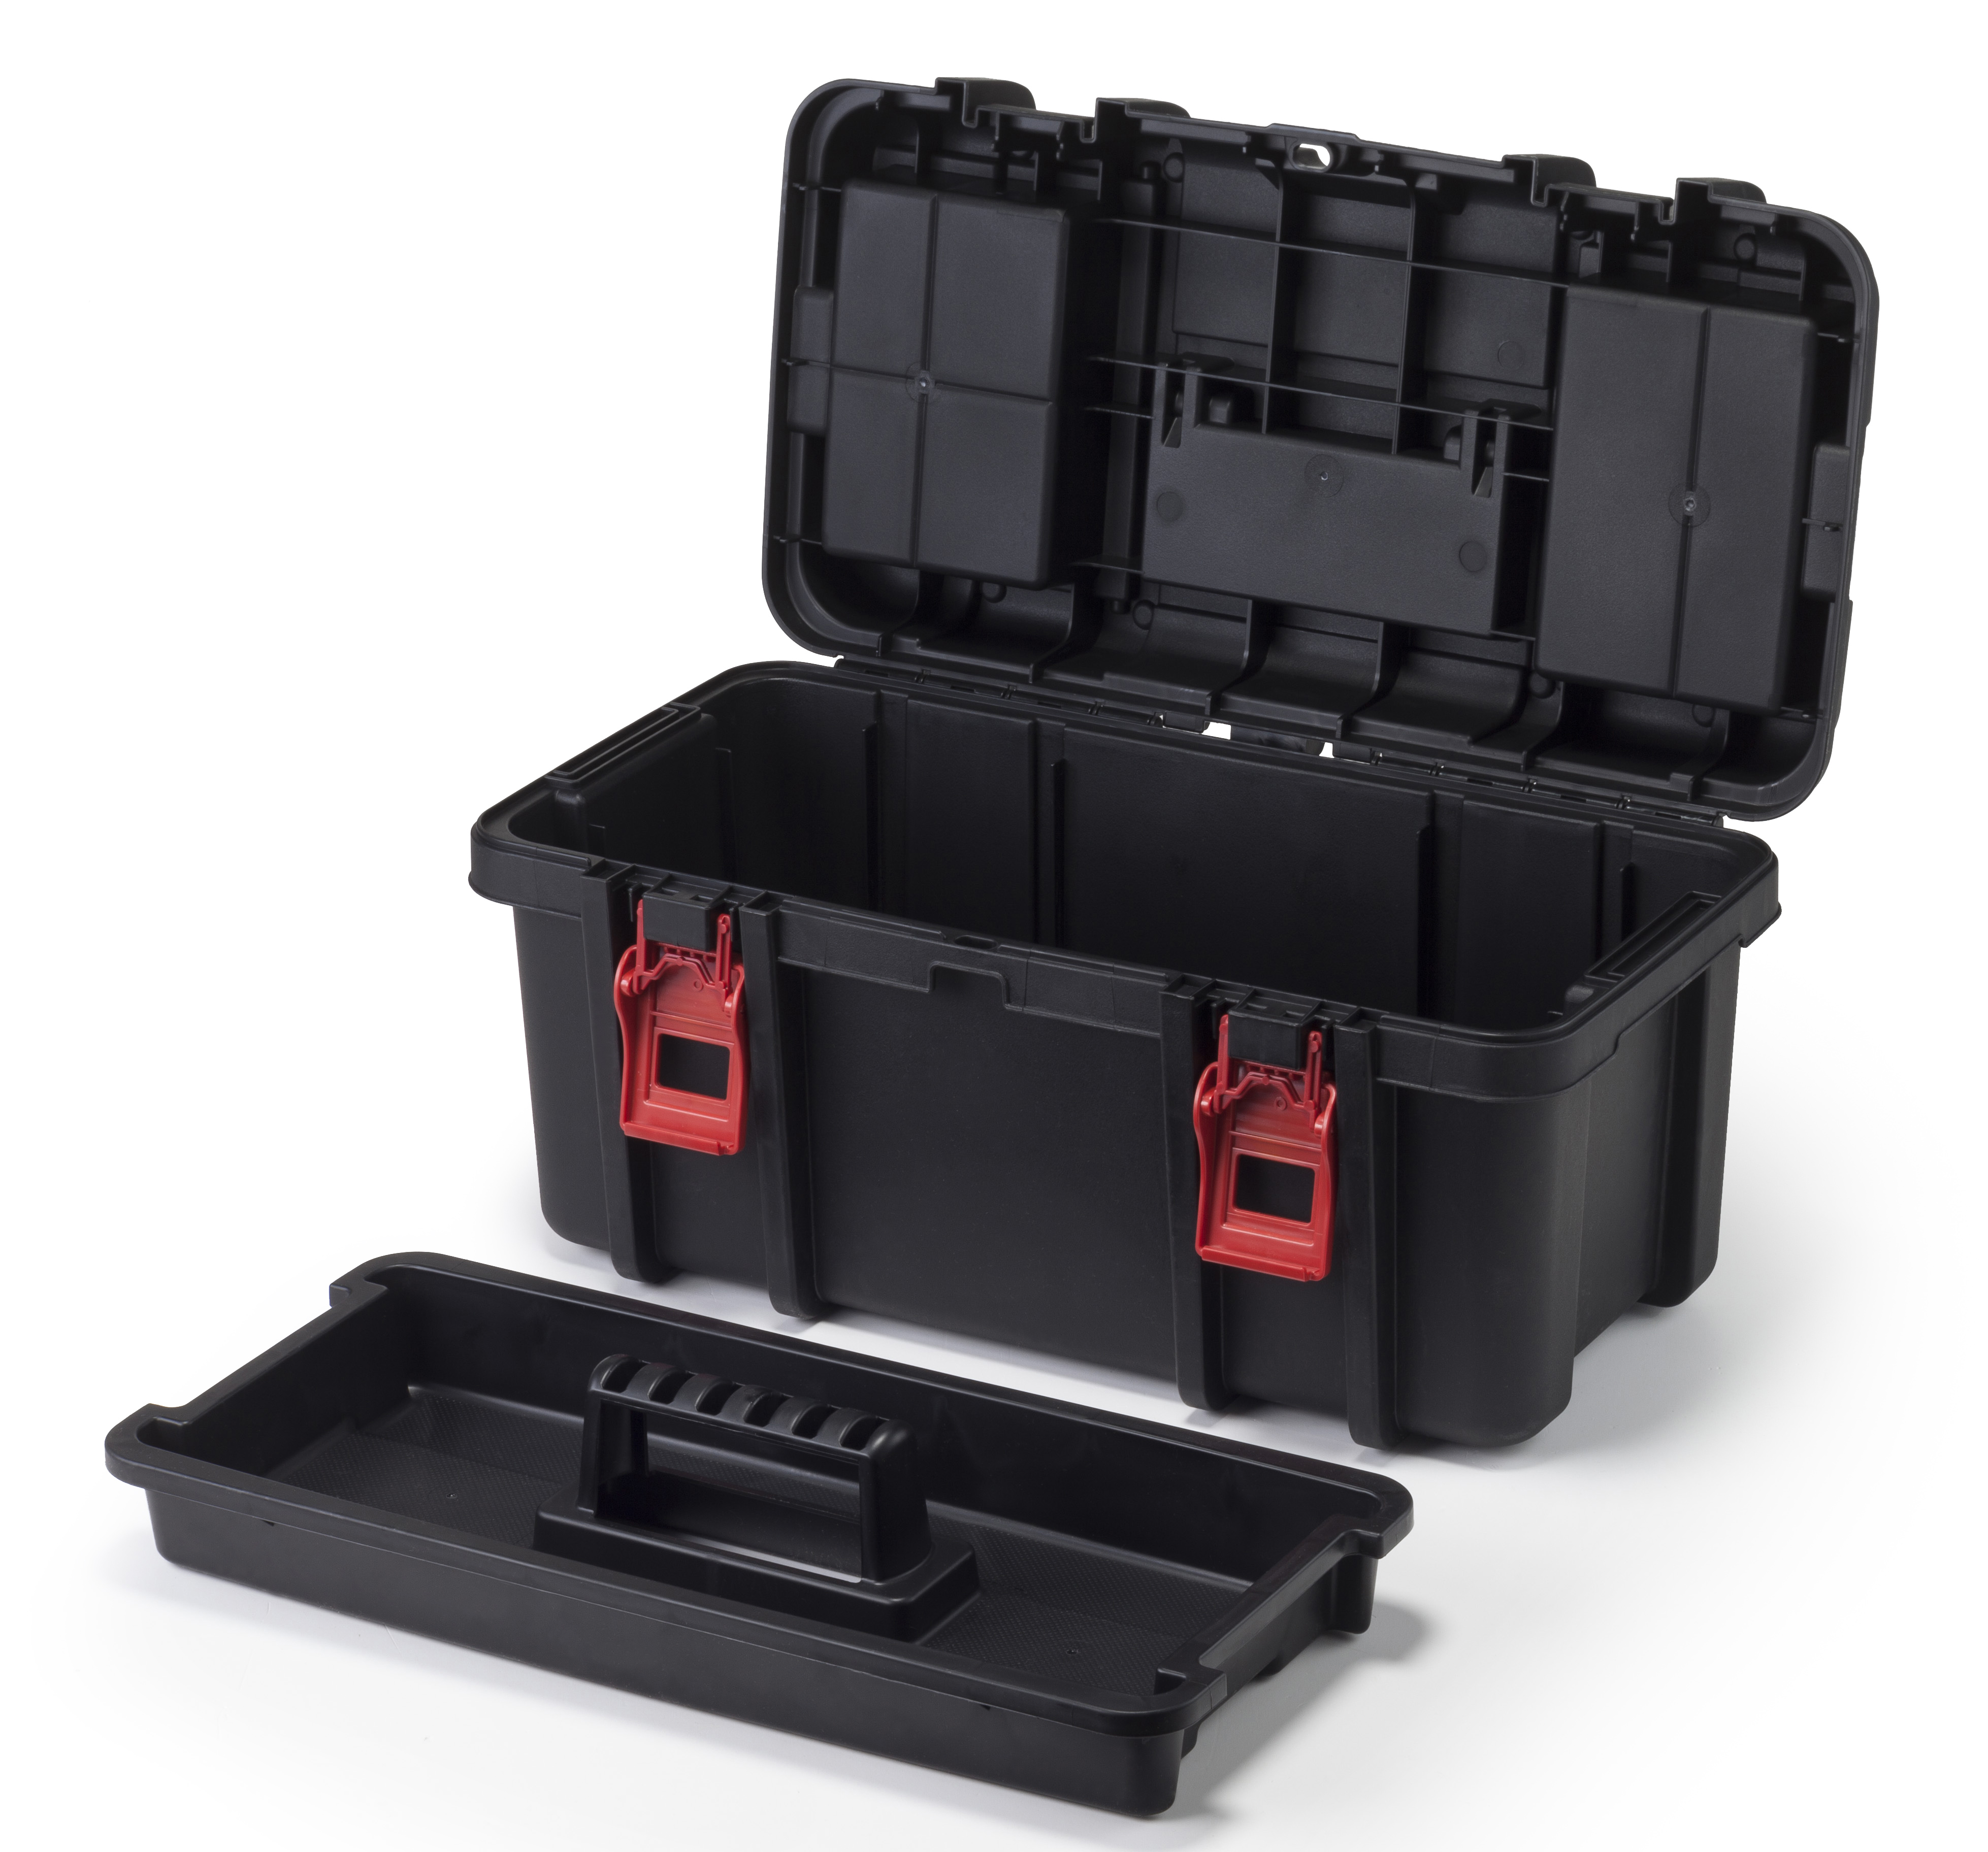 Hyper Tough 19-inch Toolbox, Plastic Tool and Hardware Storage, Black - image 4 of 13